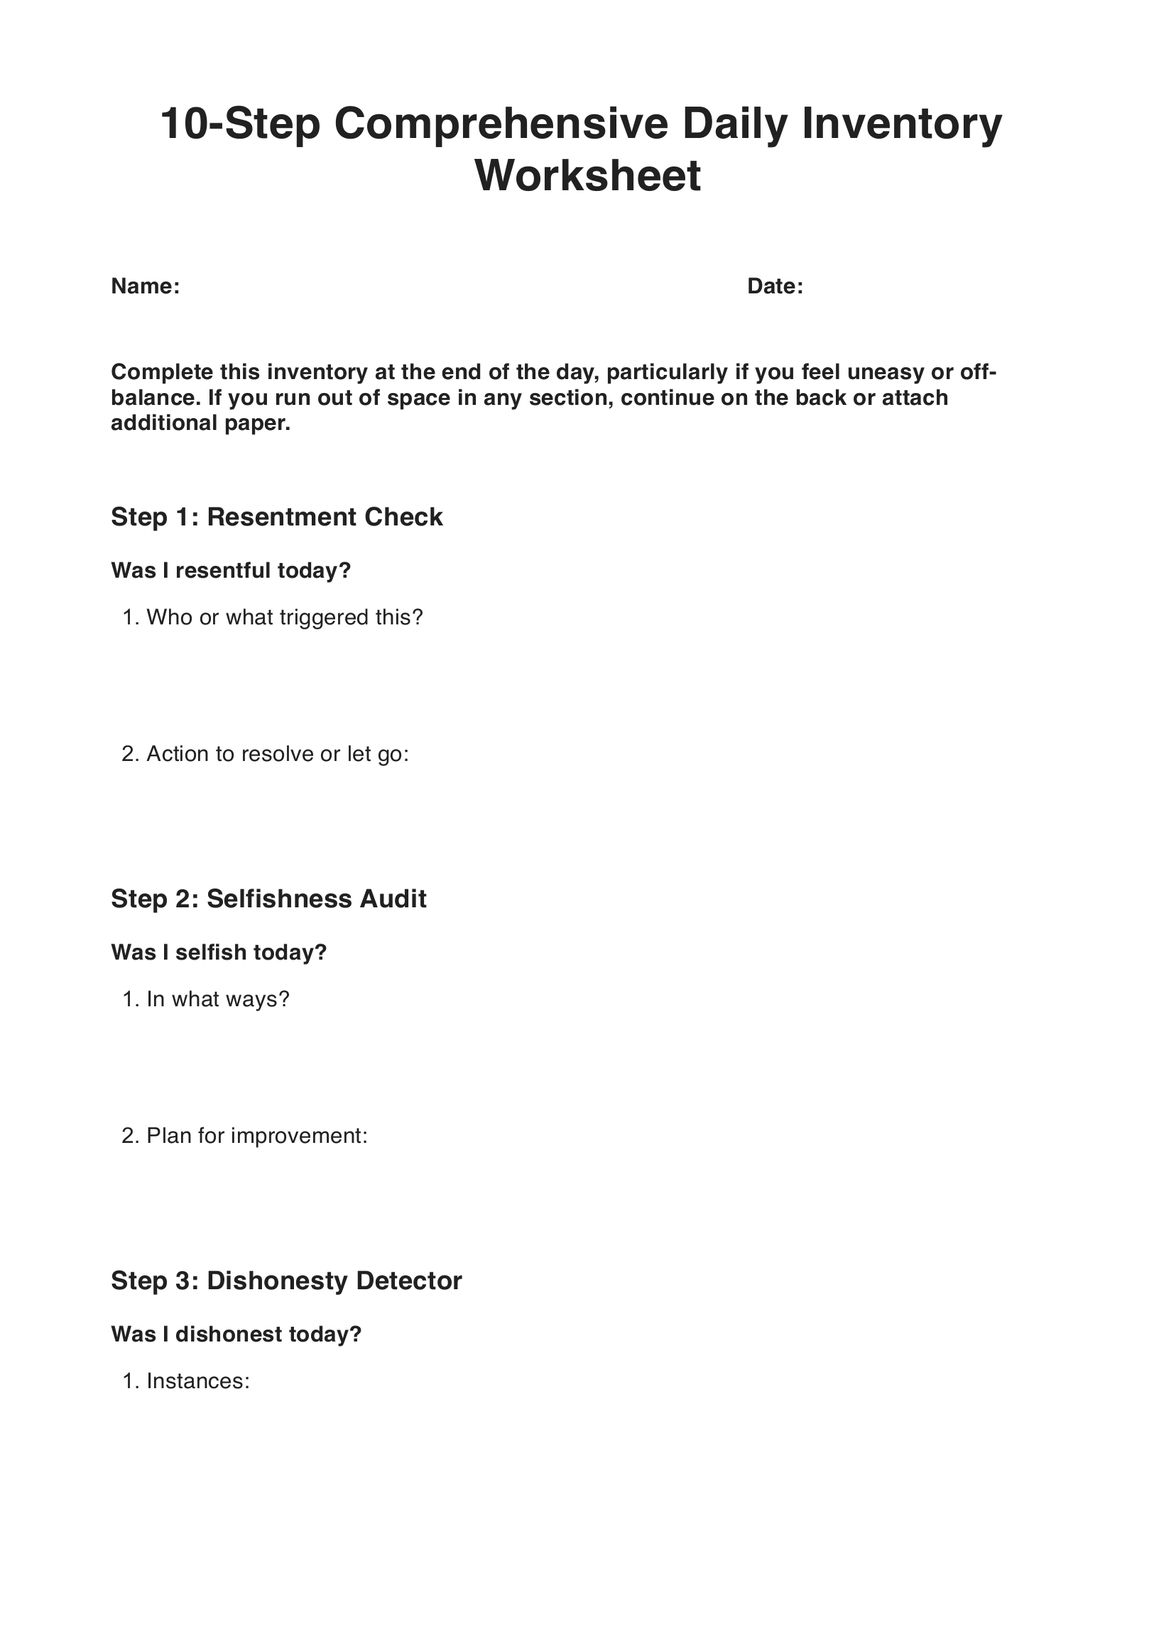 10-Step Inventory Worksheets PDF Example